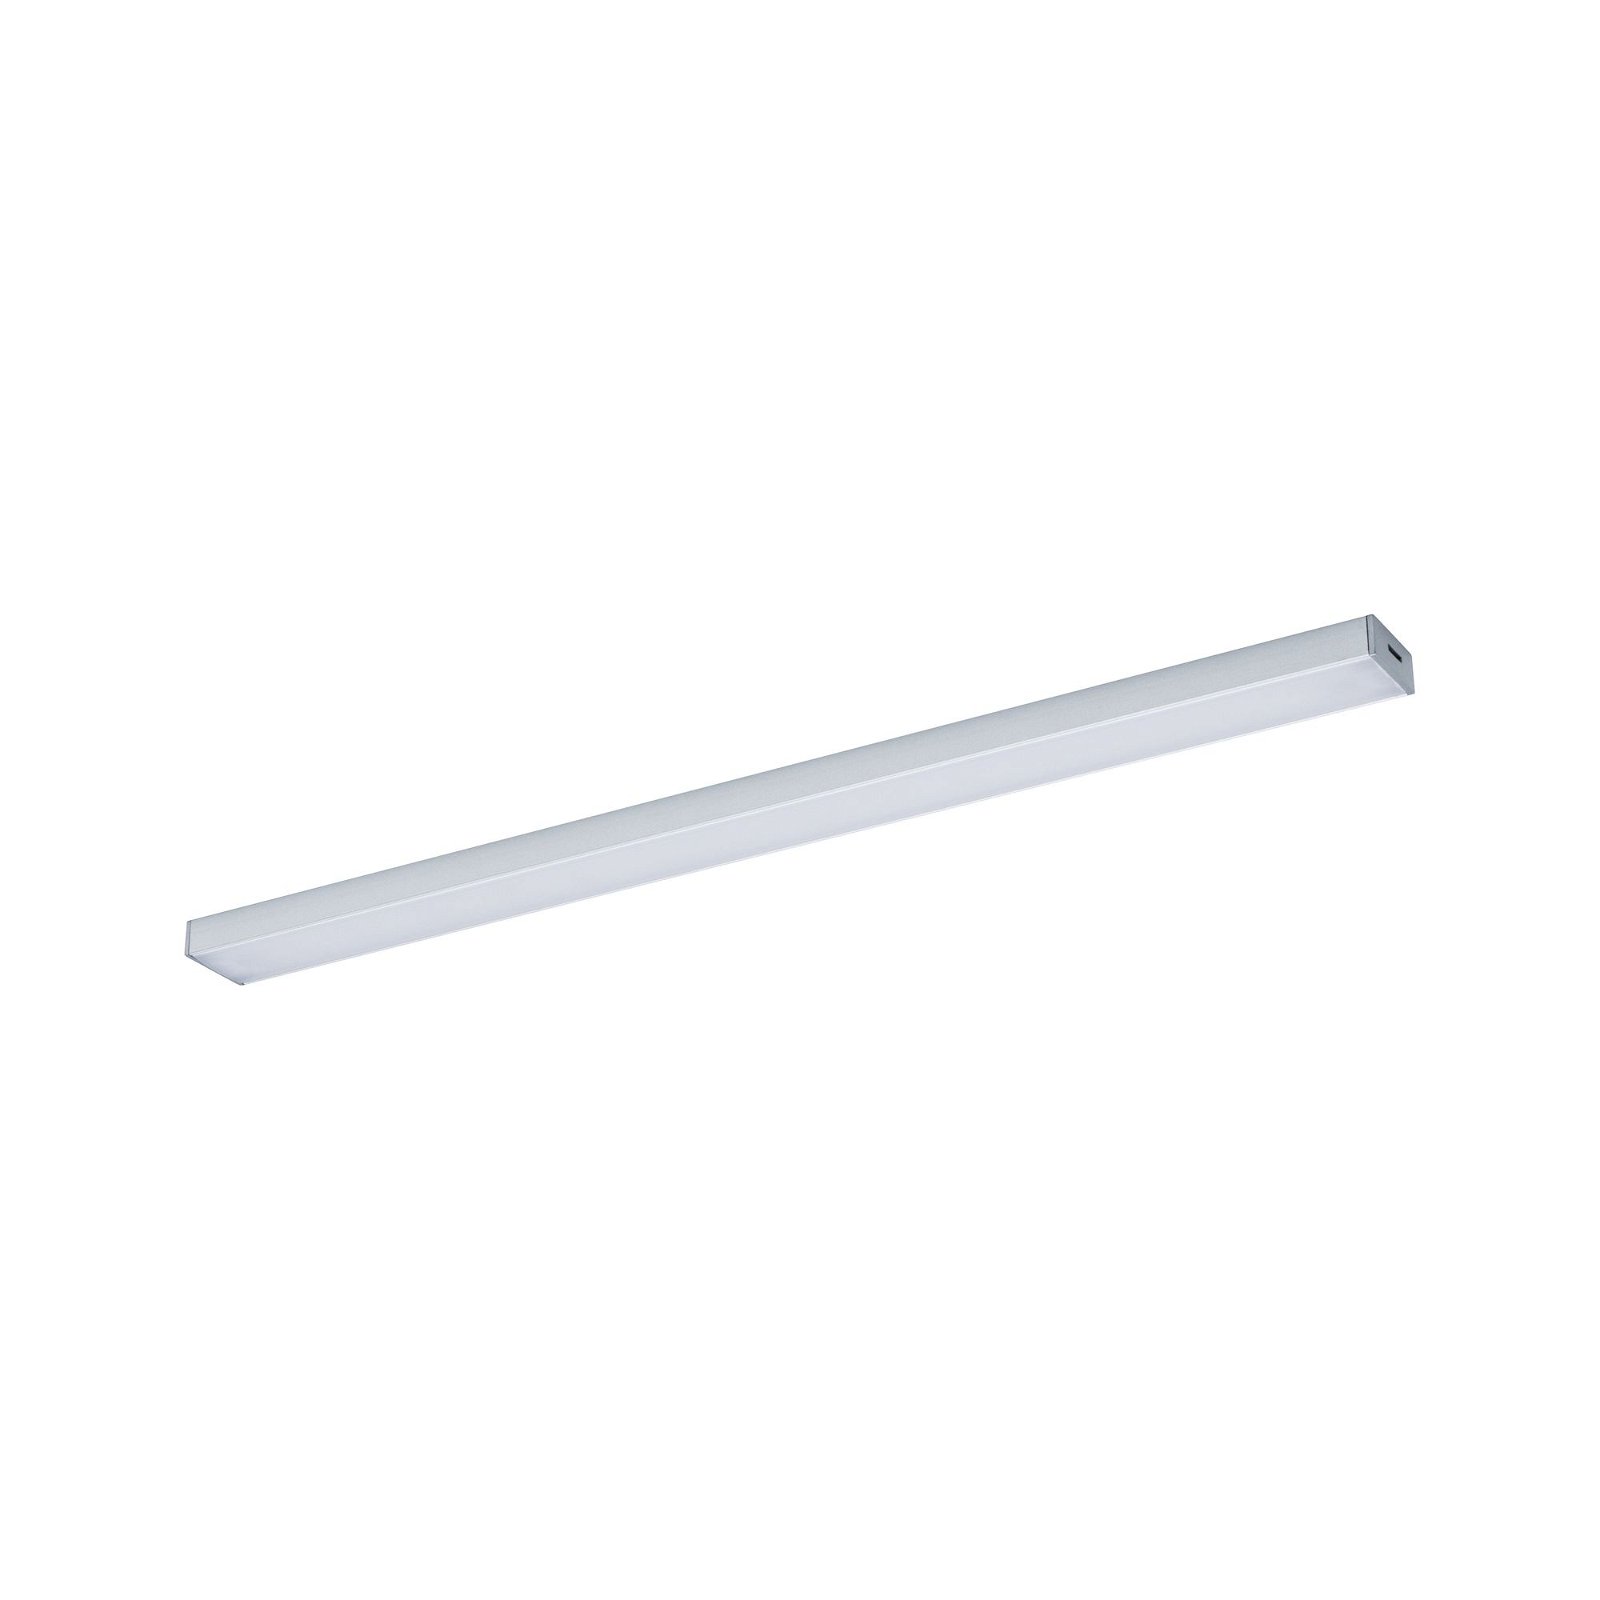 Clever Connect LED Spot Barre Tunable White 3,5W Chrome matt